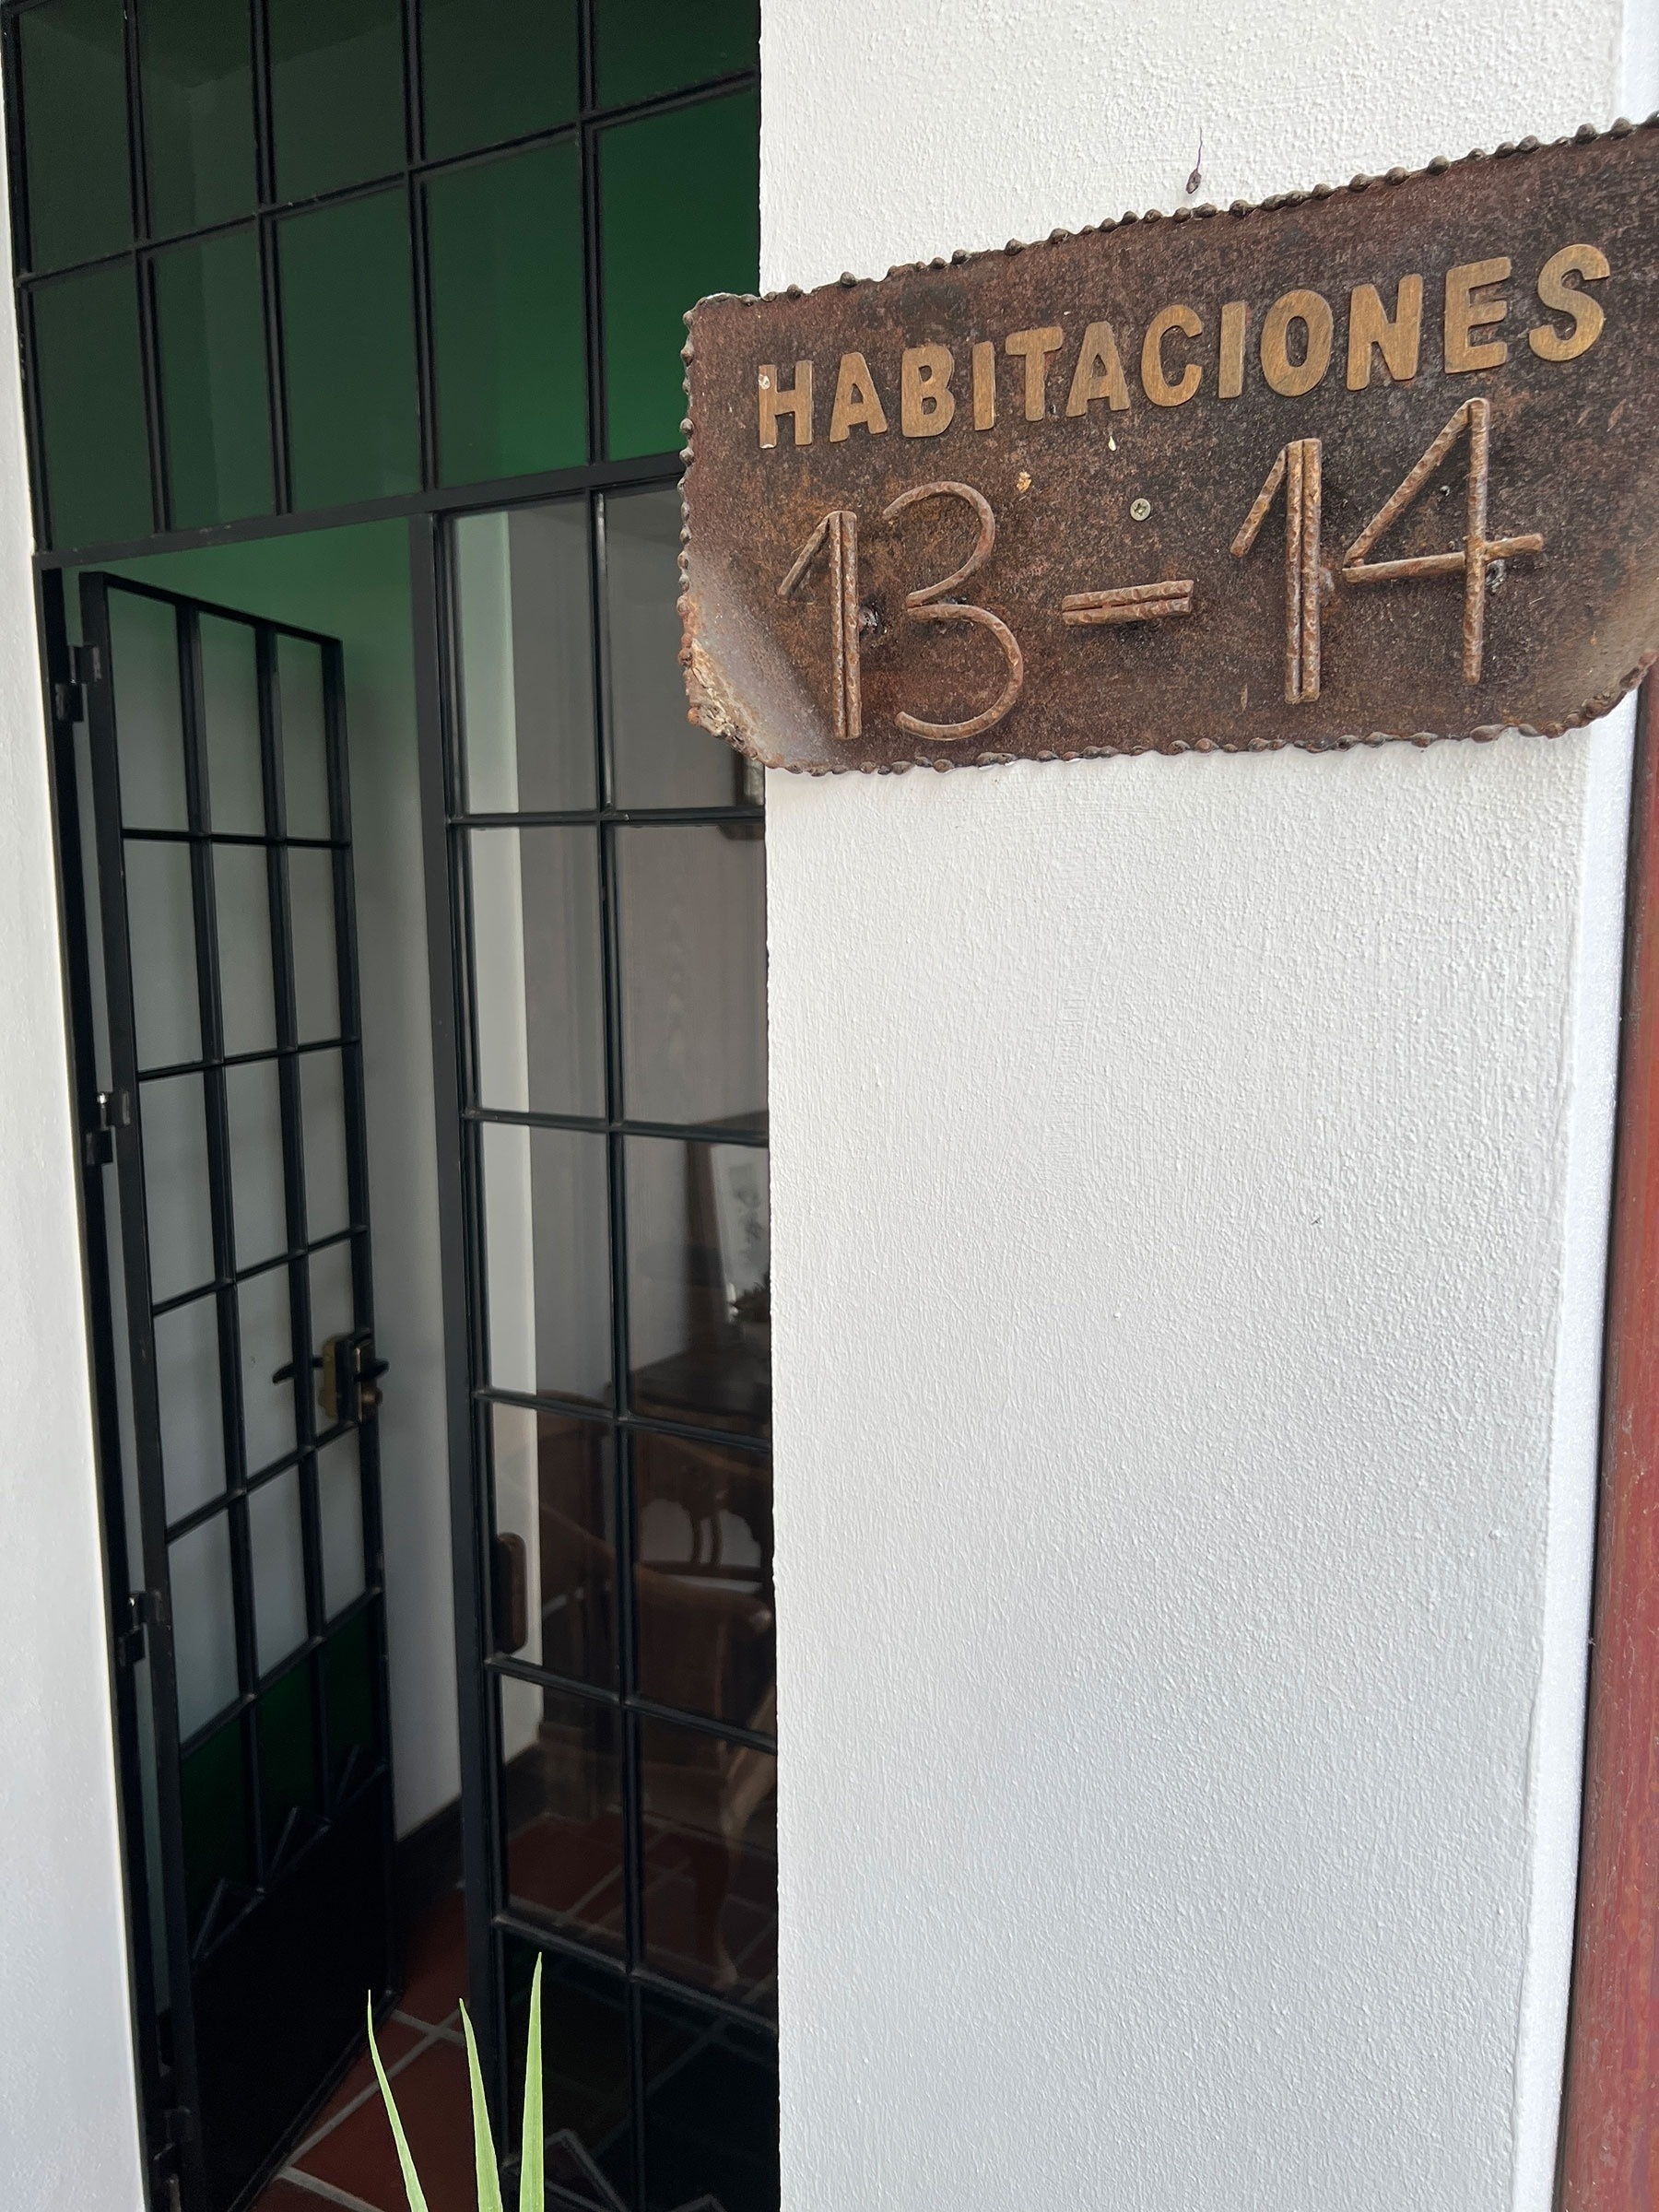 a sign on a wall that says habitaciones 13-14